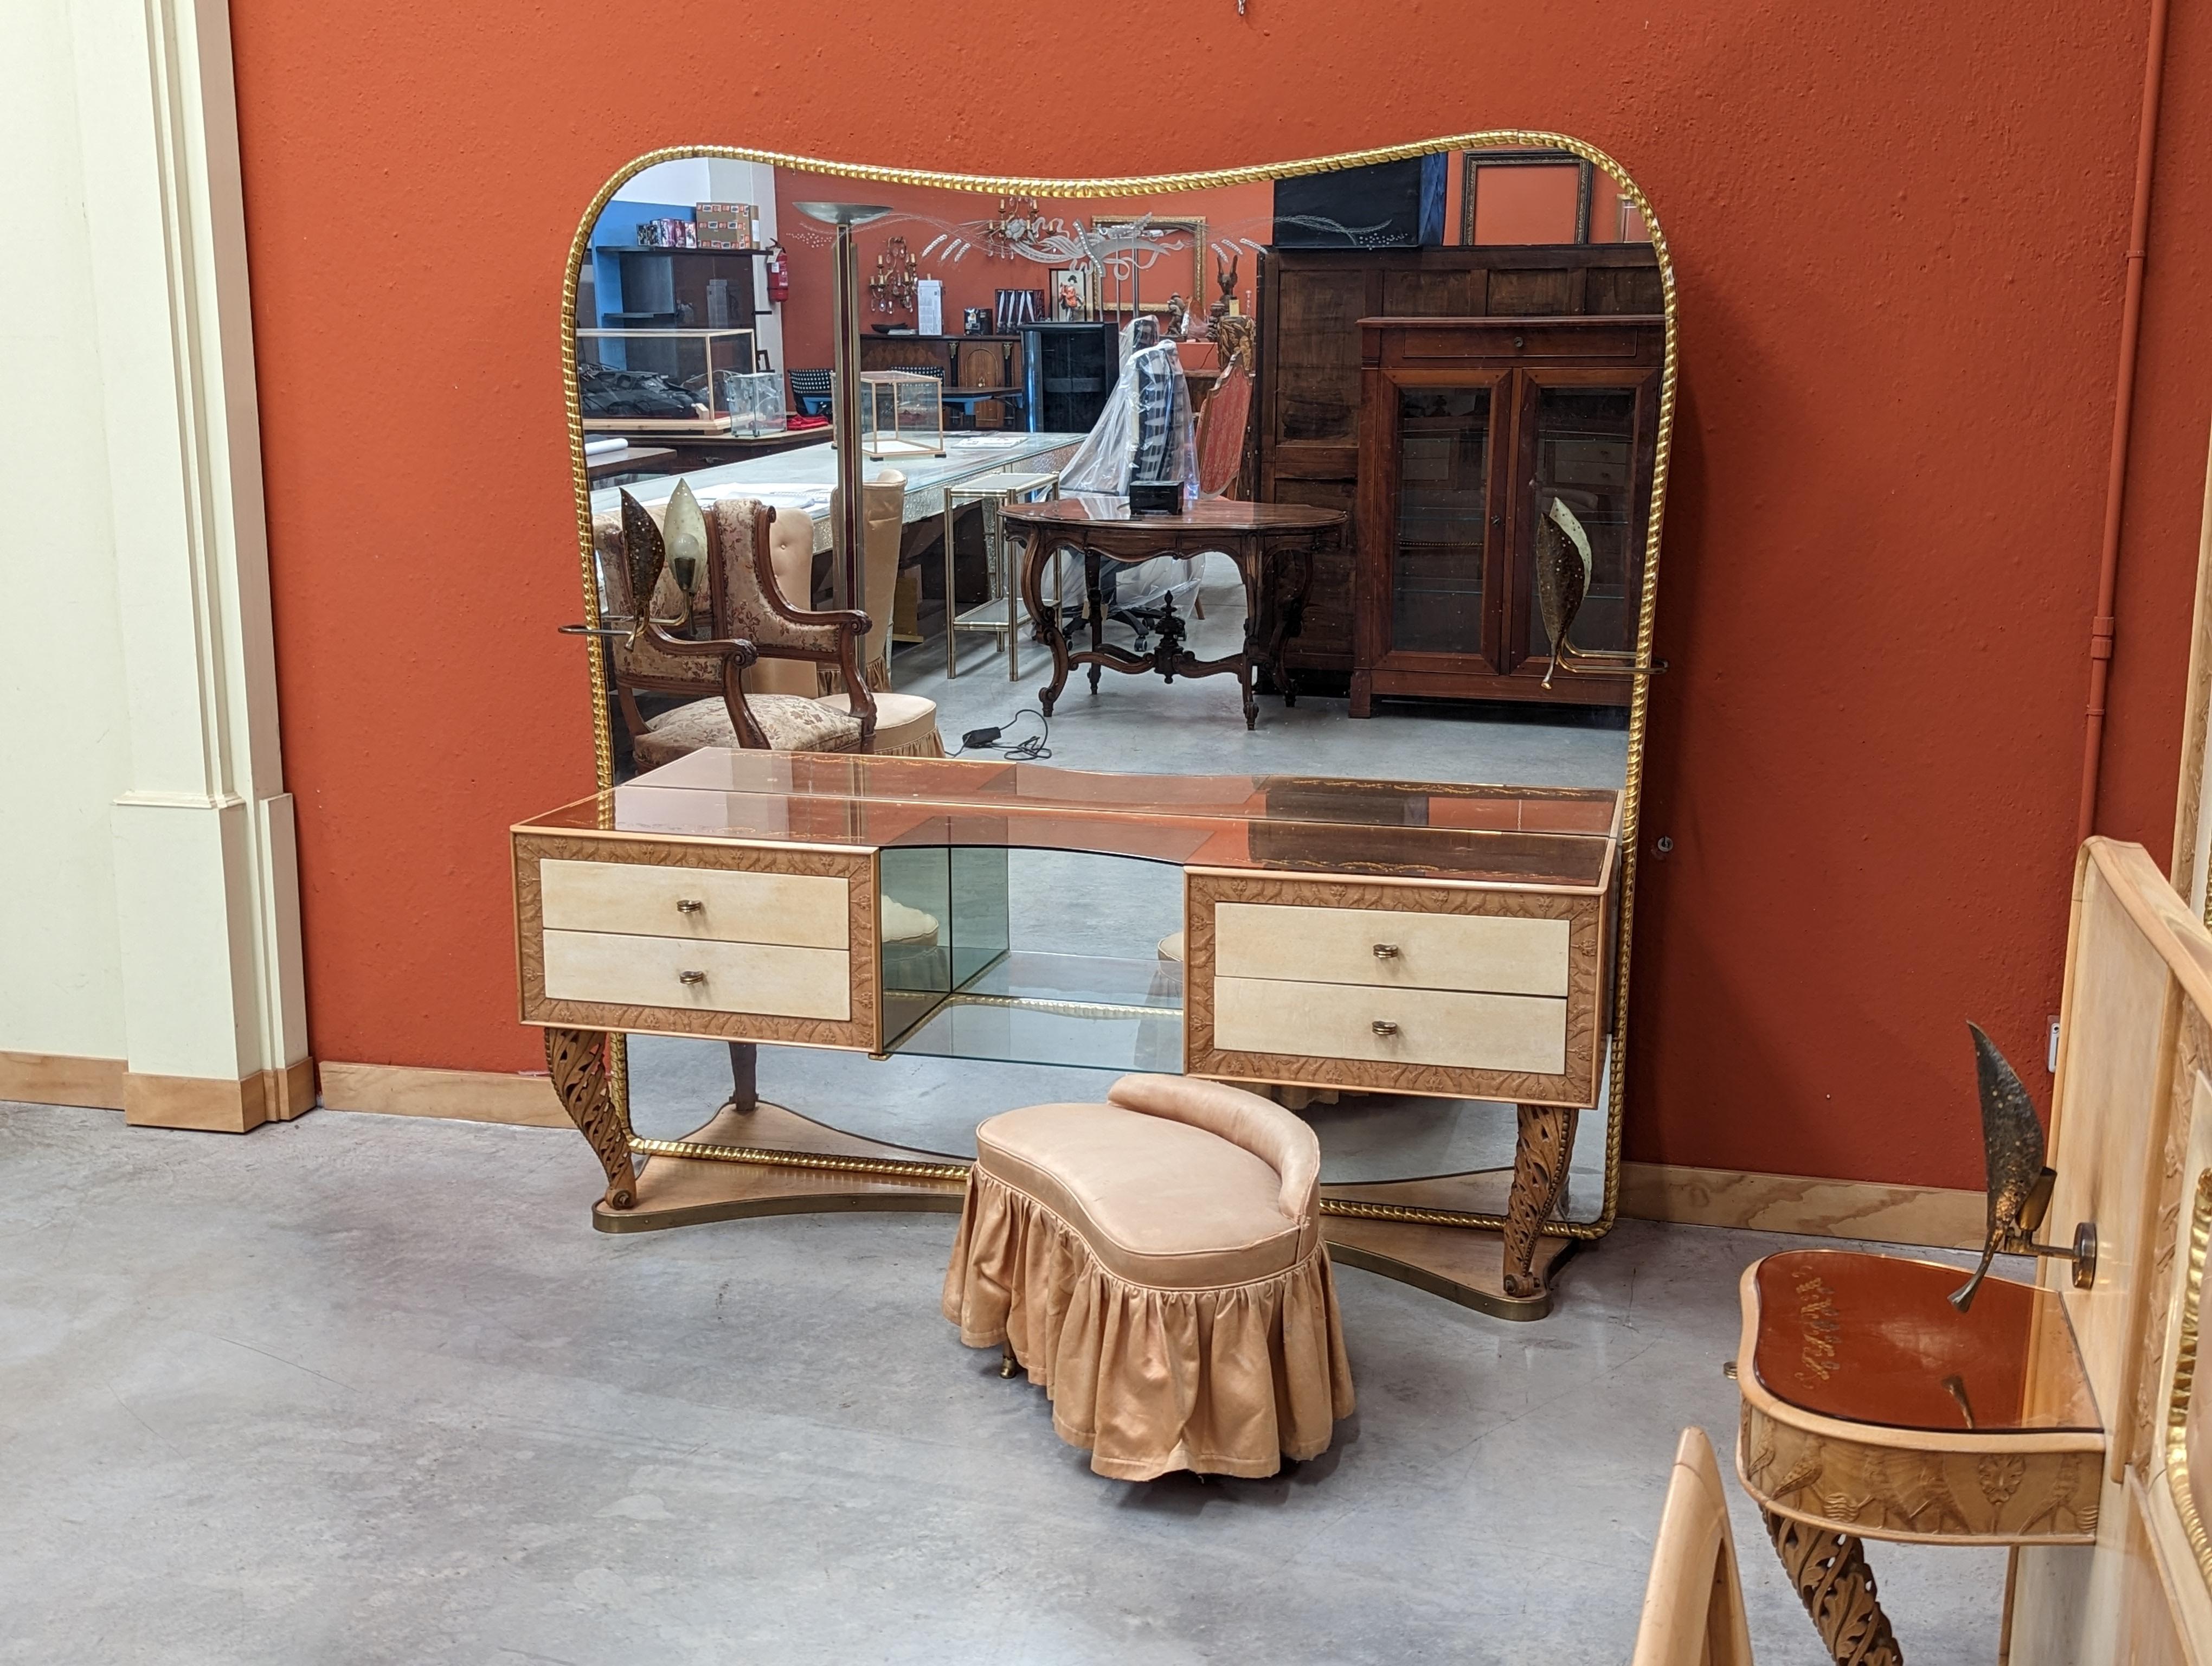 This is a splendid vanity table or petineuse designed by Pierluigi Colli and crafted in Turin in the first half of the 1900s. The attention to detail is remarkable, with a plethora of exquisite features that elevate it to a true design masterpiece.